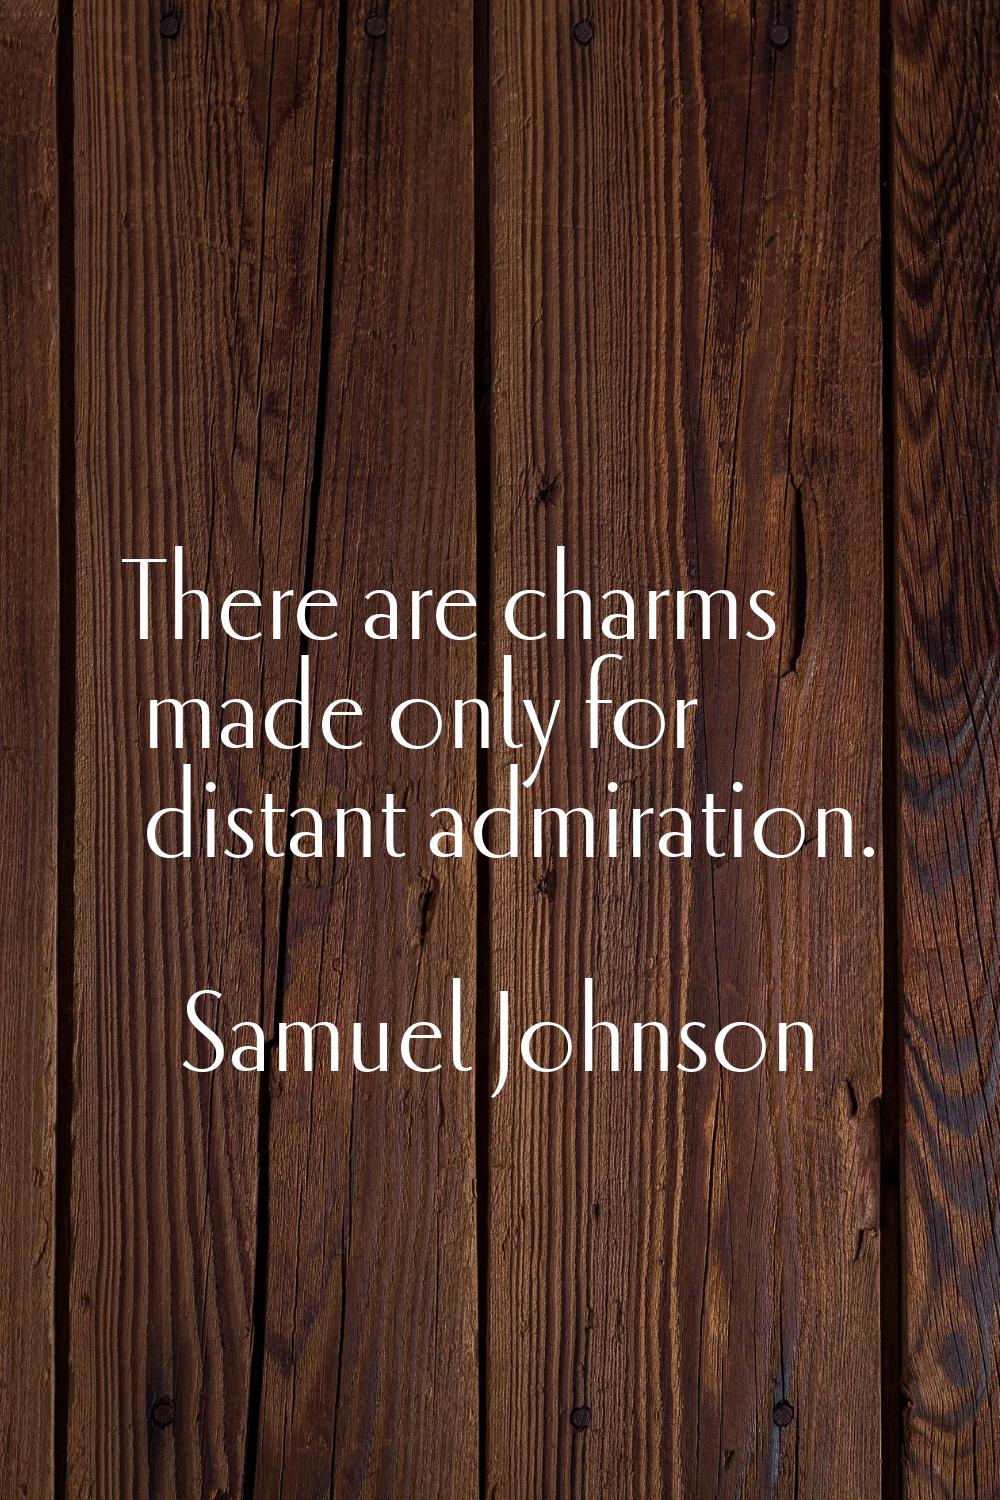 There are charms made only for distant admiration.